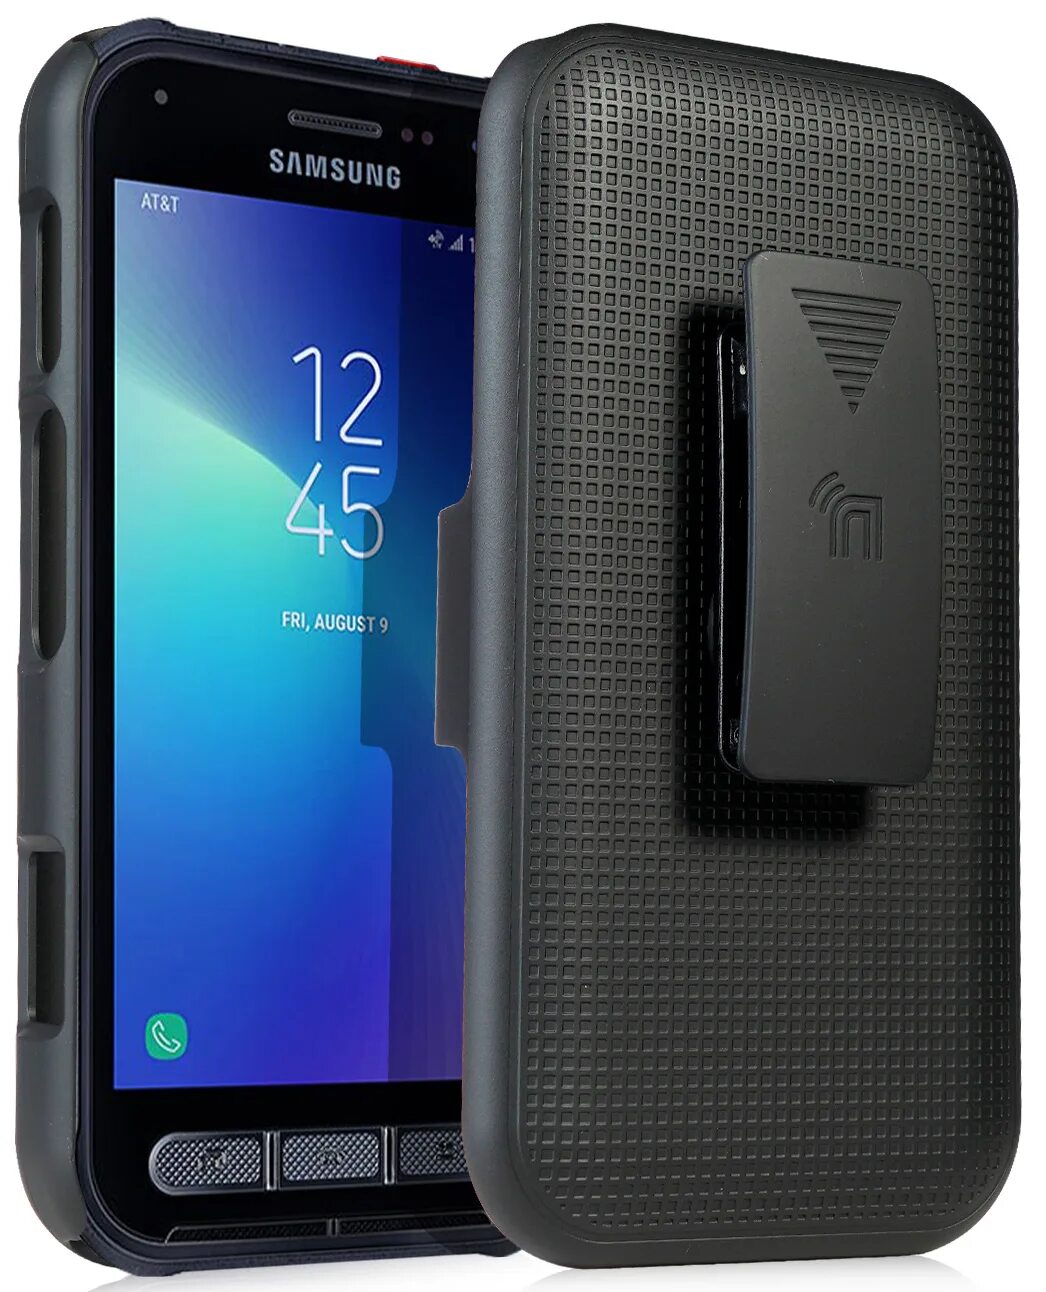 Galaxy xcover 6 pro. Samsung Galaxy Xcover 1. Samsung Galaxy Xcover 4s. Samsung Xcover 4s. Samsung Galaxy Xcover 4.